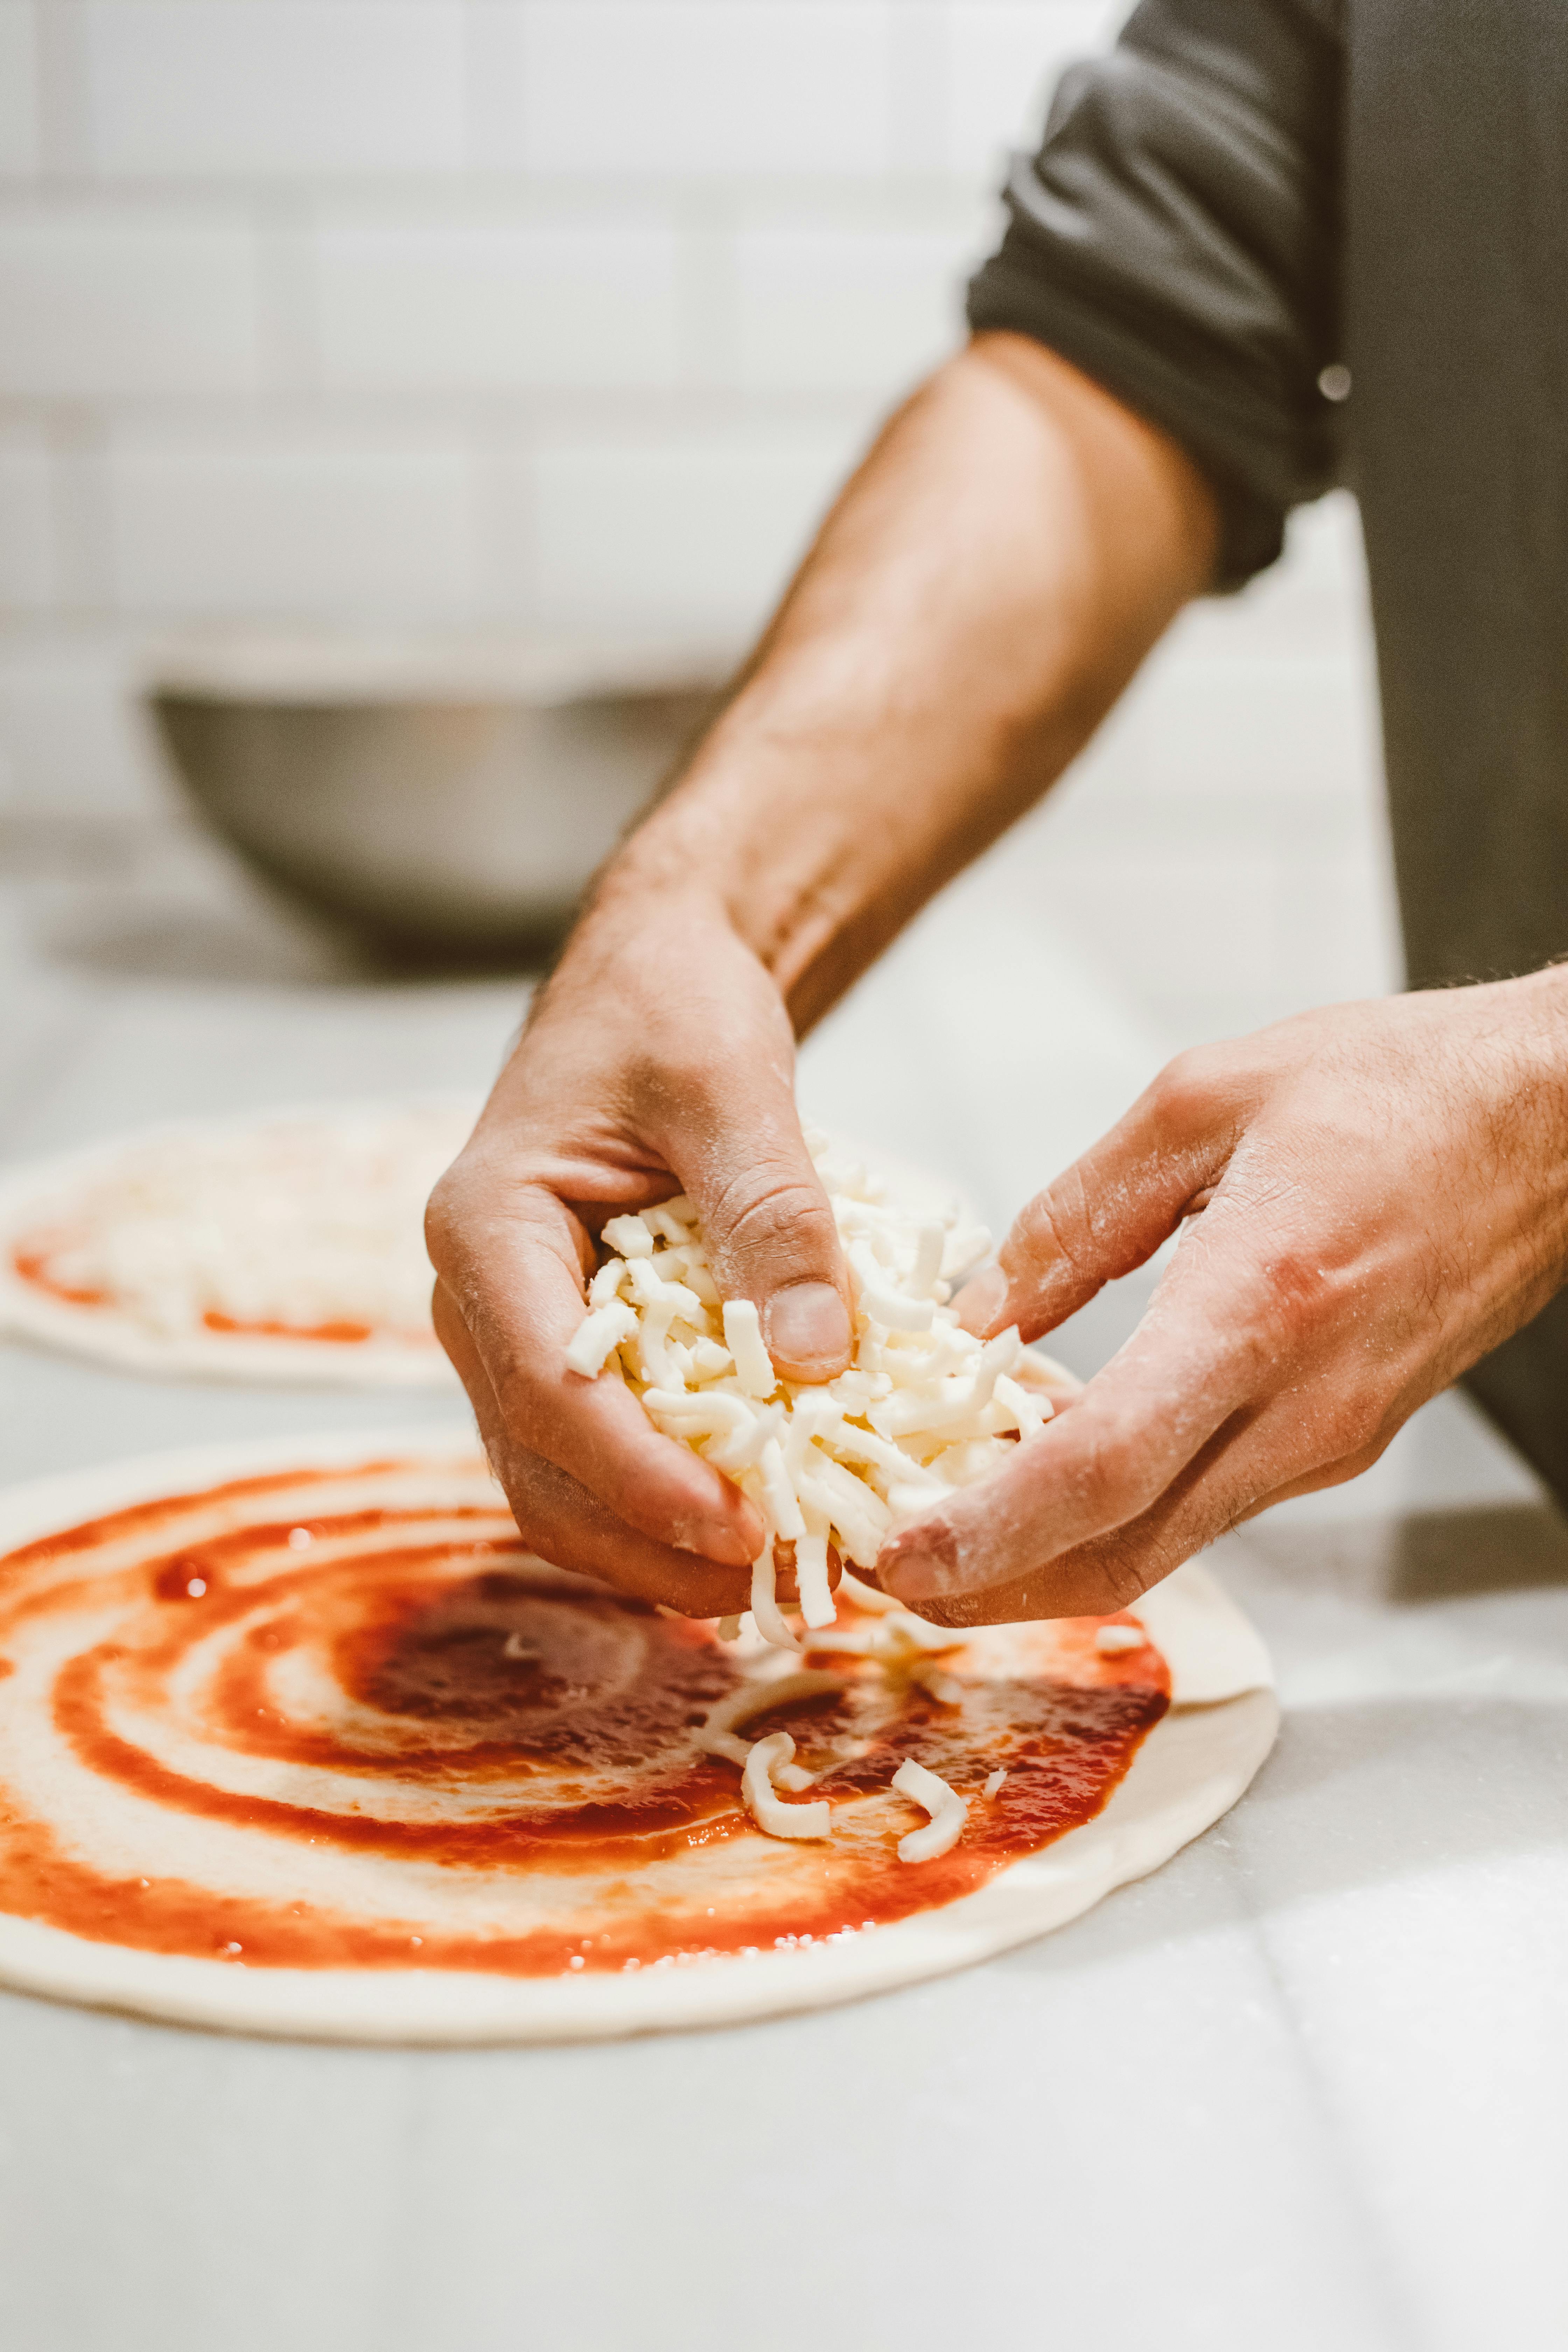 A man making pizza from scratch | Source: Pexels